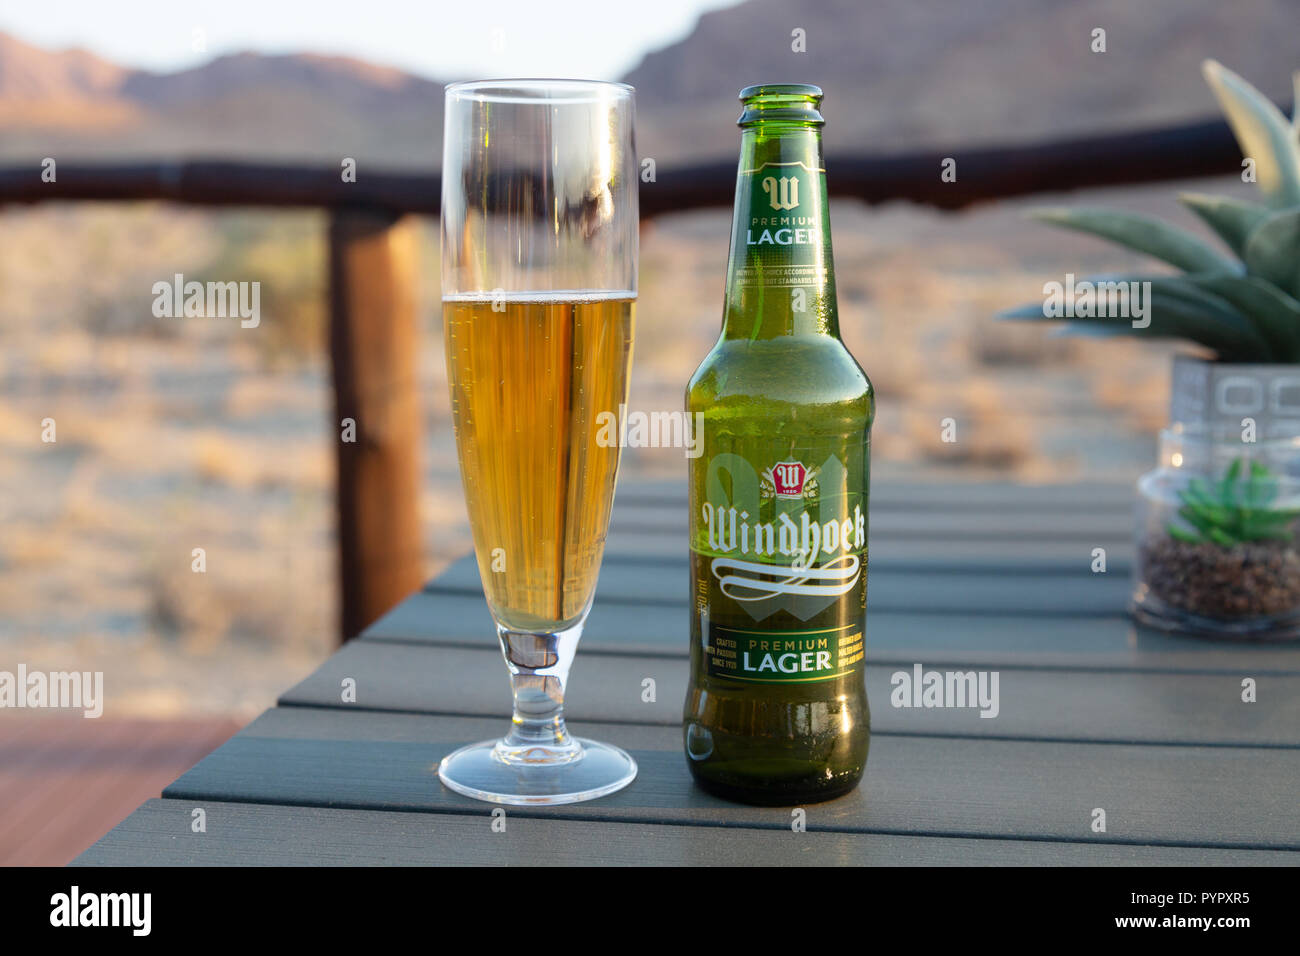 Namibia beer - Windhoek lager bottle and glass, in Namibia Africa Stock Photo